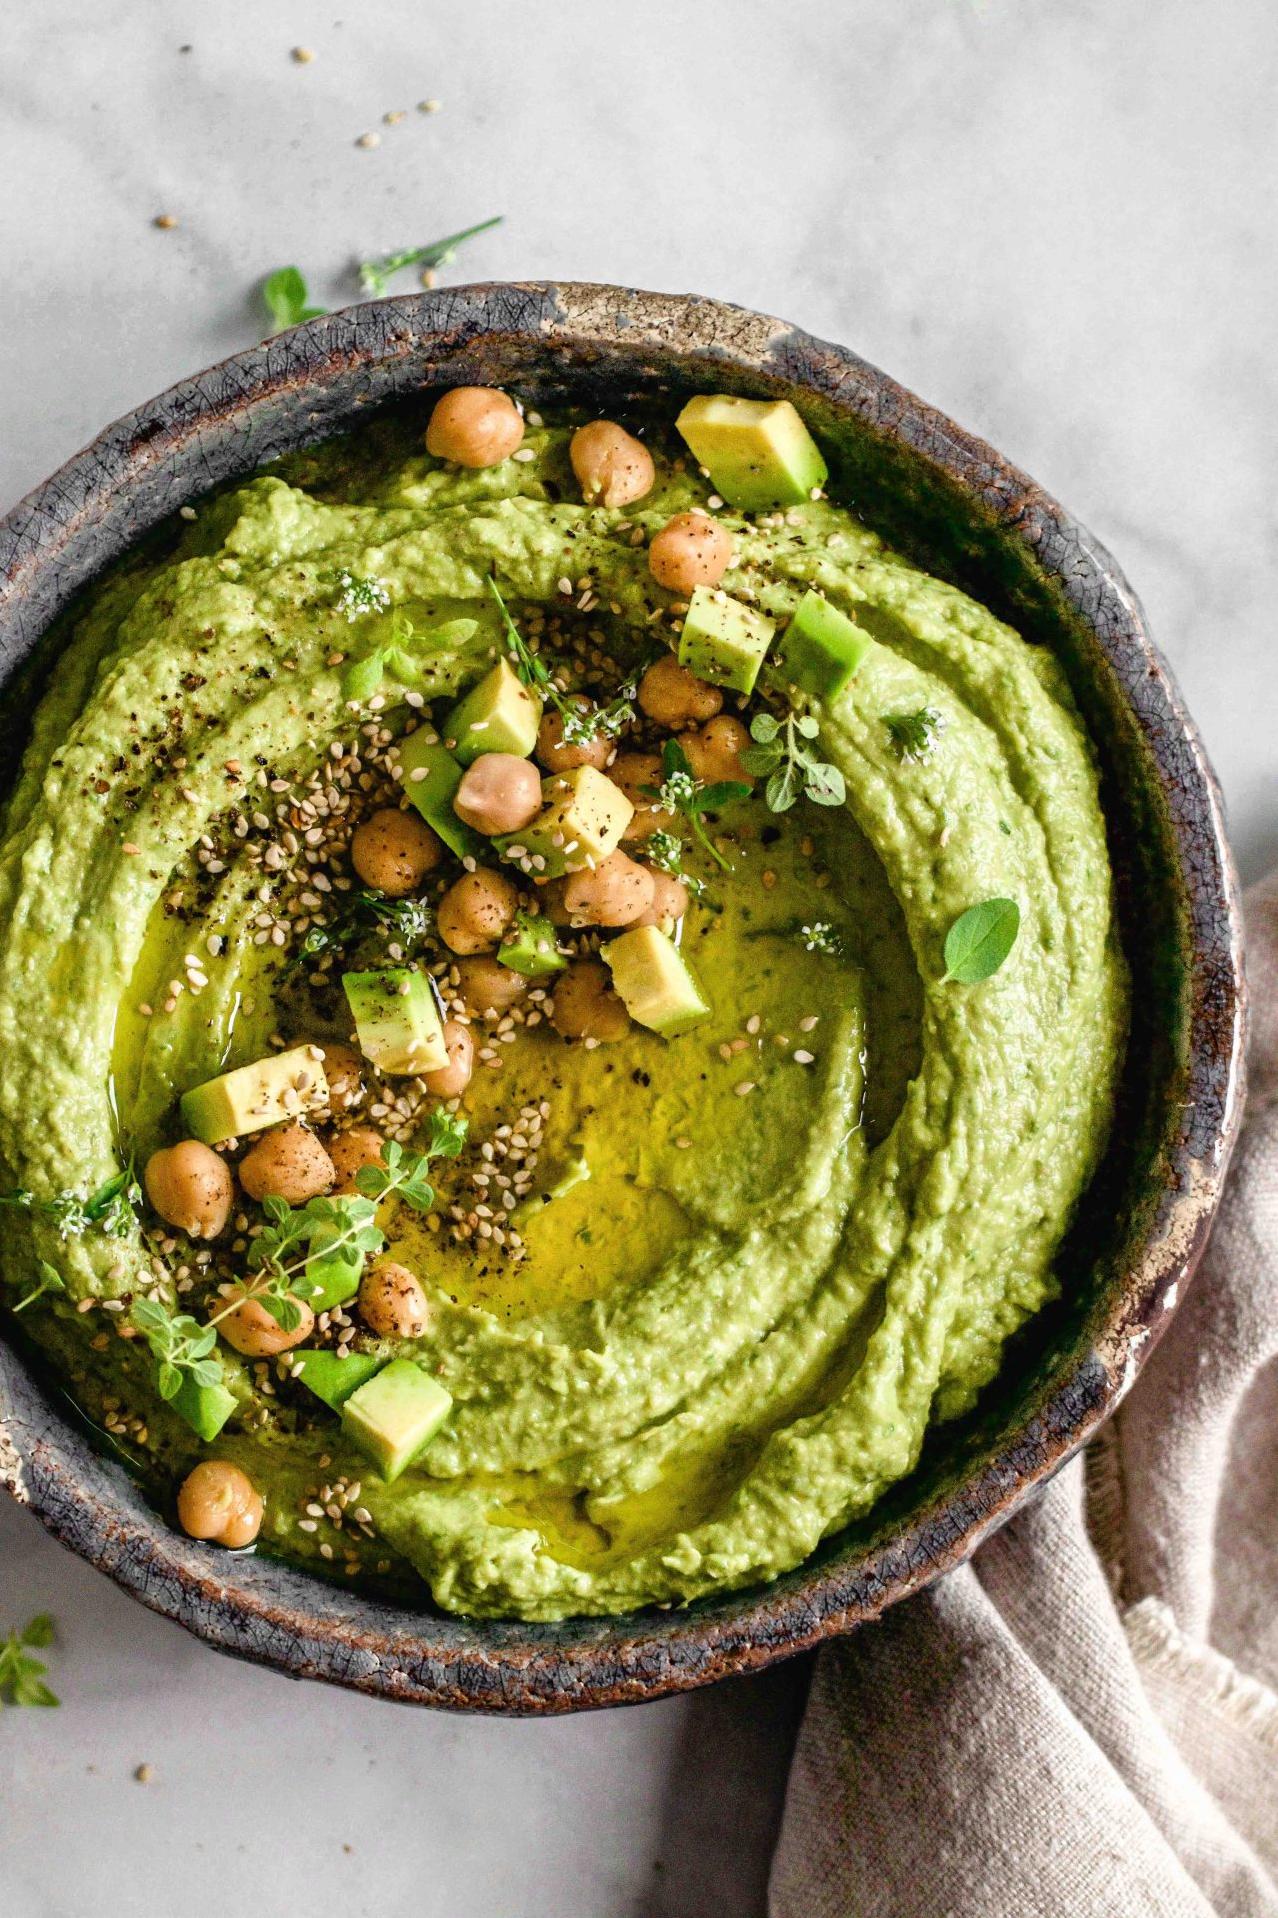  Make your taste buds dance with this spinach hummus dip.